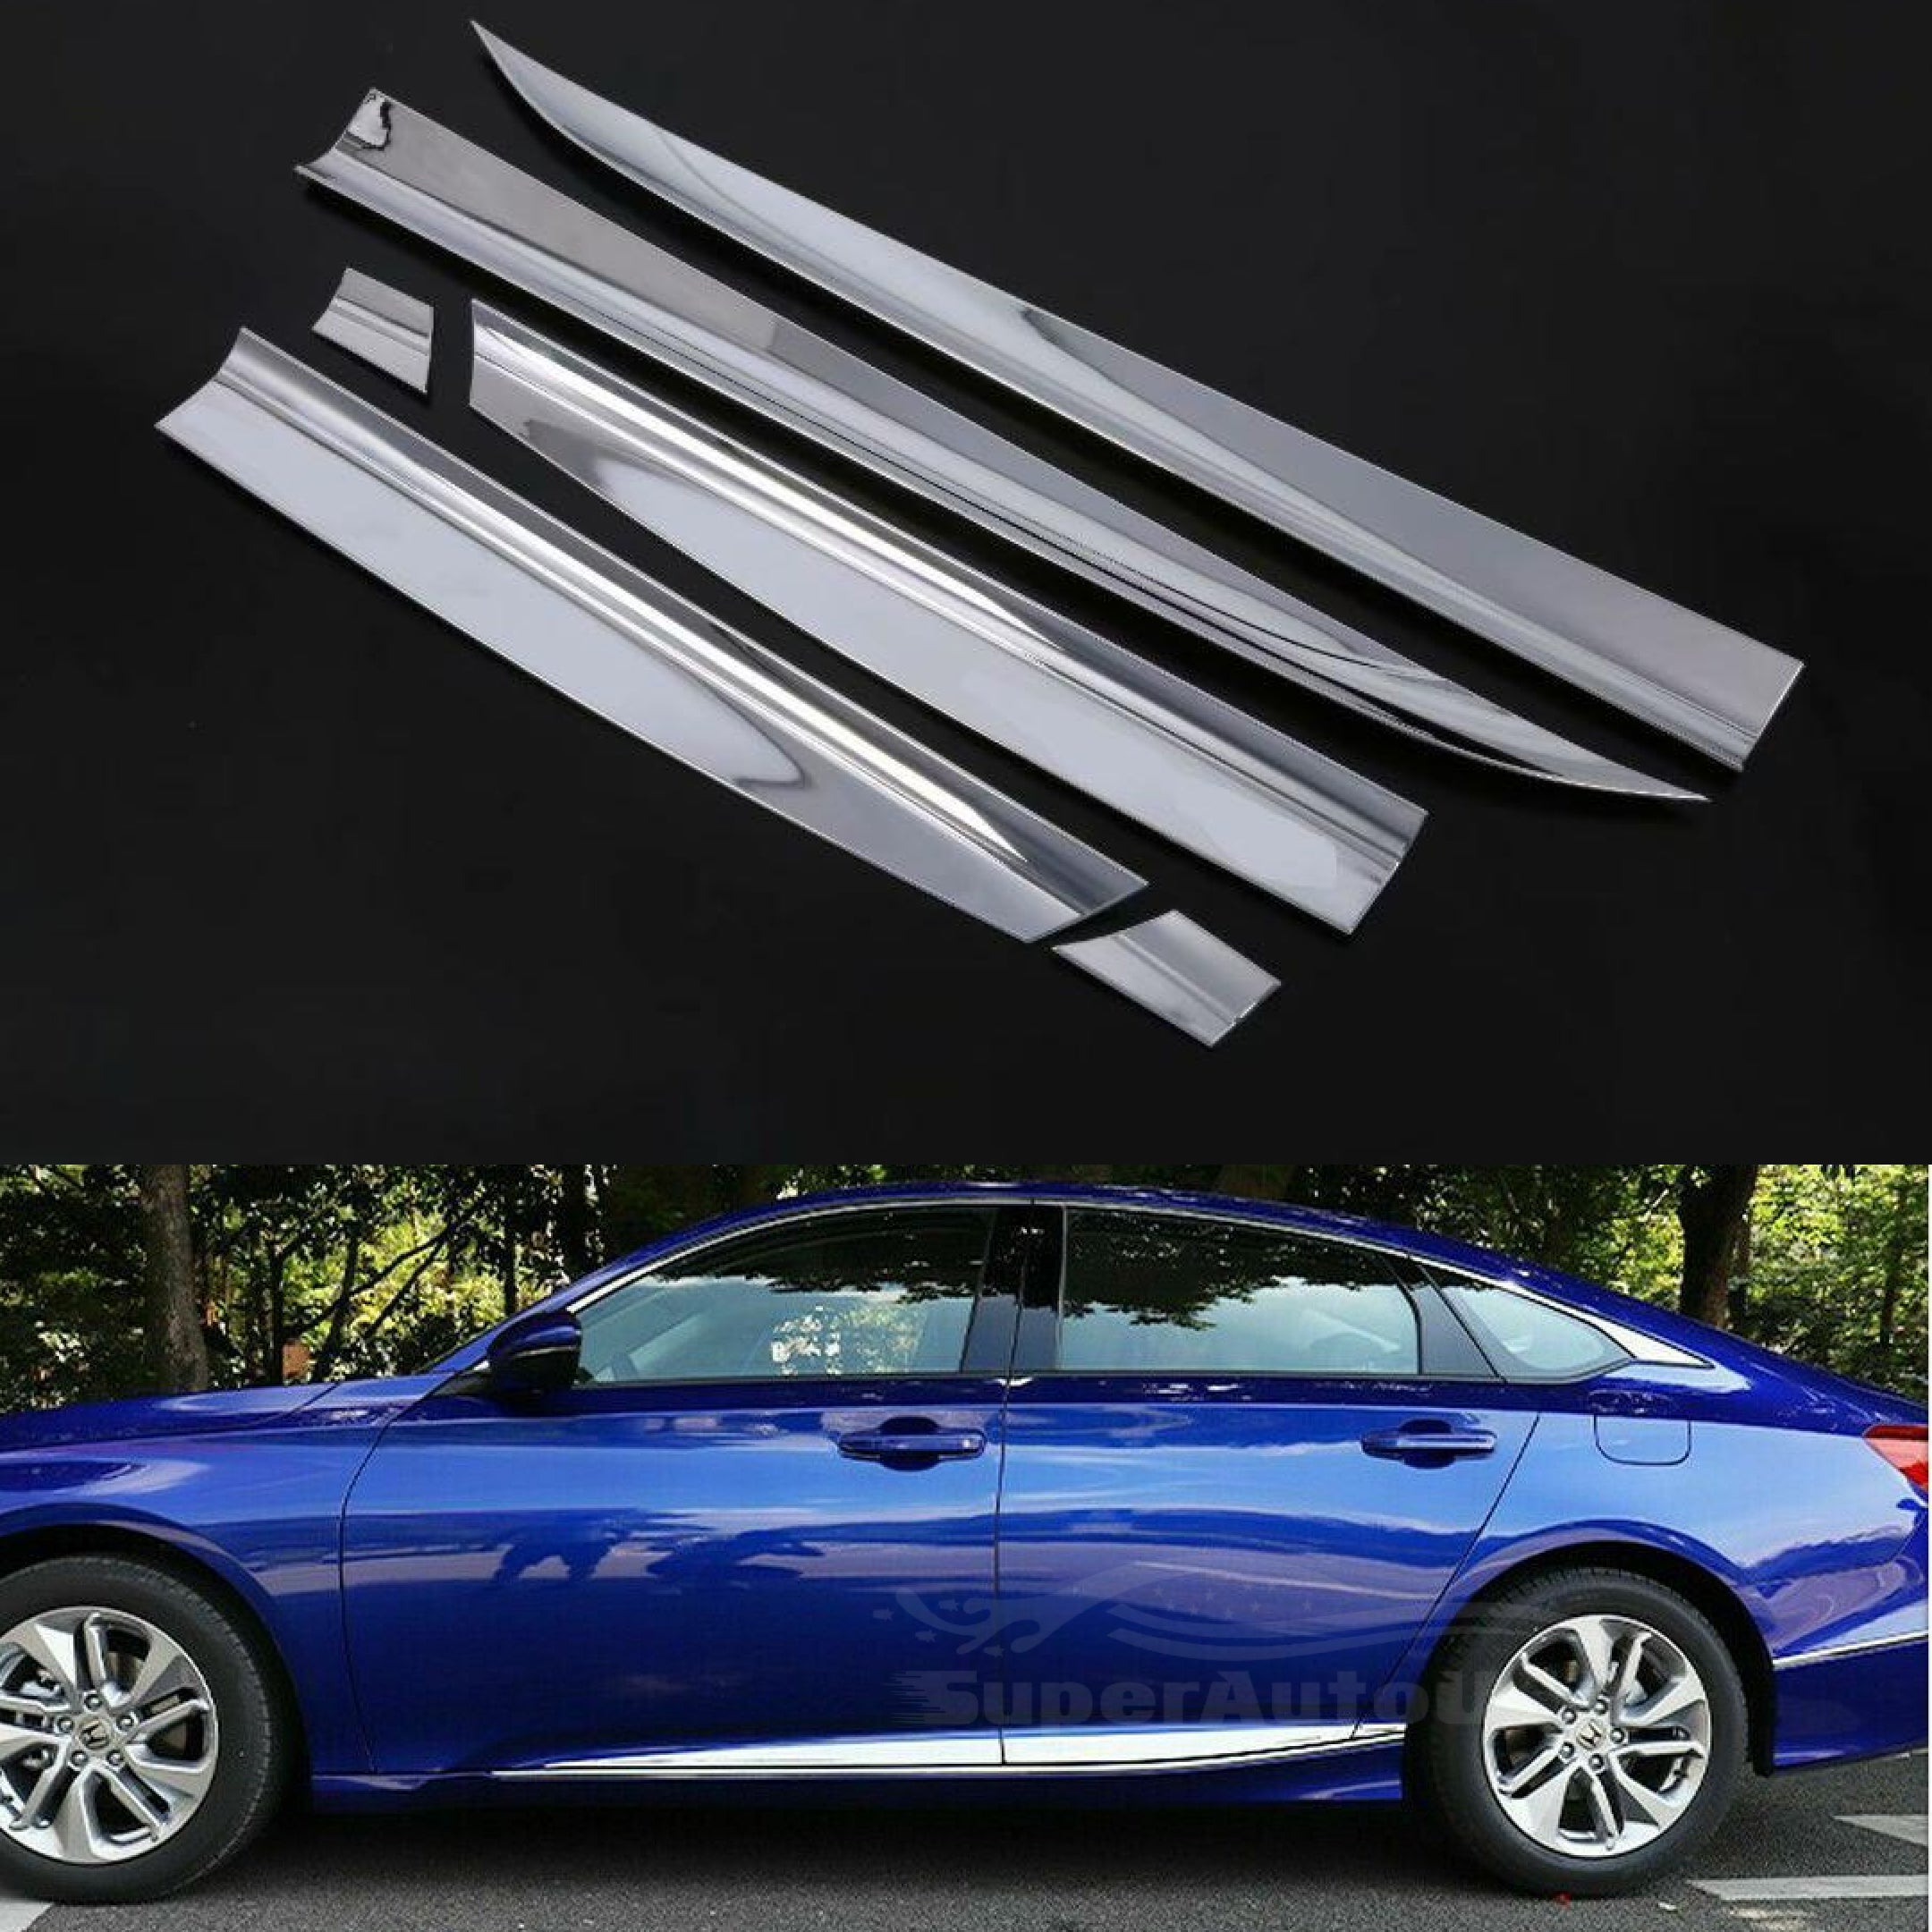 Fit 2018-2021 Honda Accord Stainless Steel Side Body Door Molding Trim (Chrome, 6 pcs)